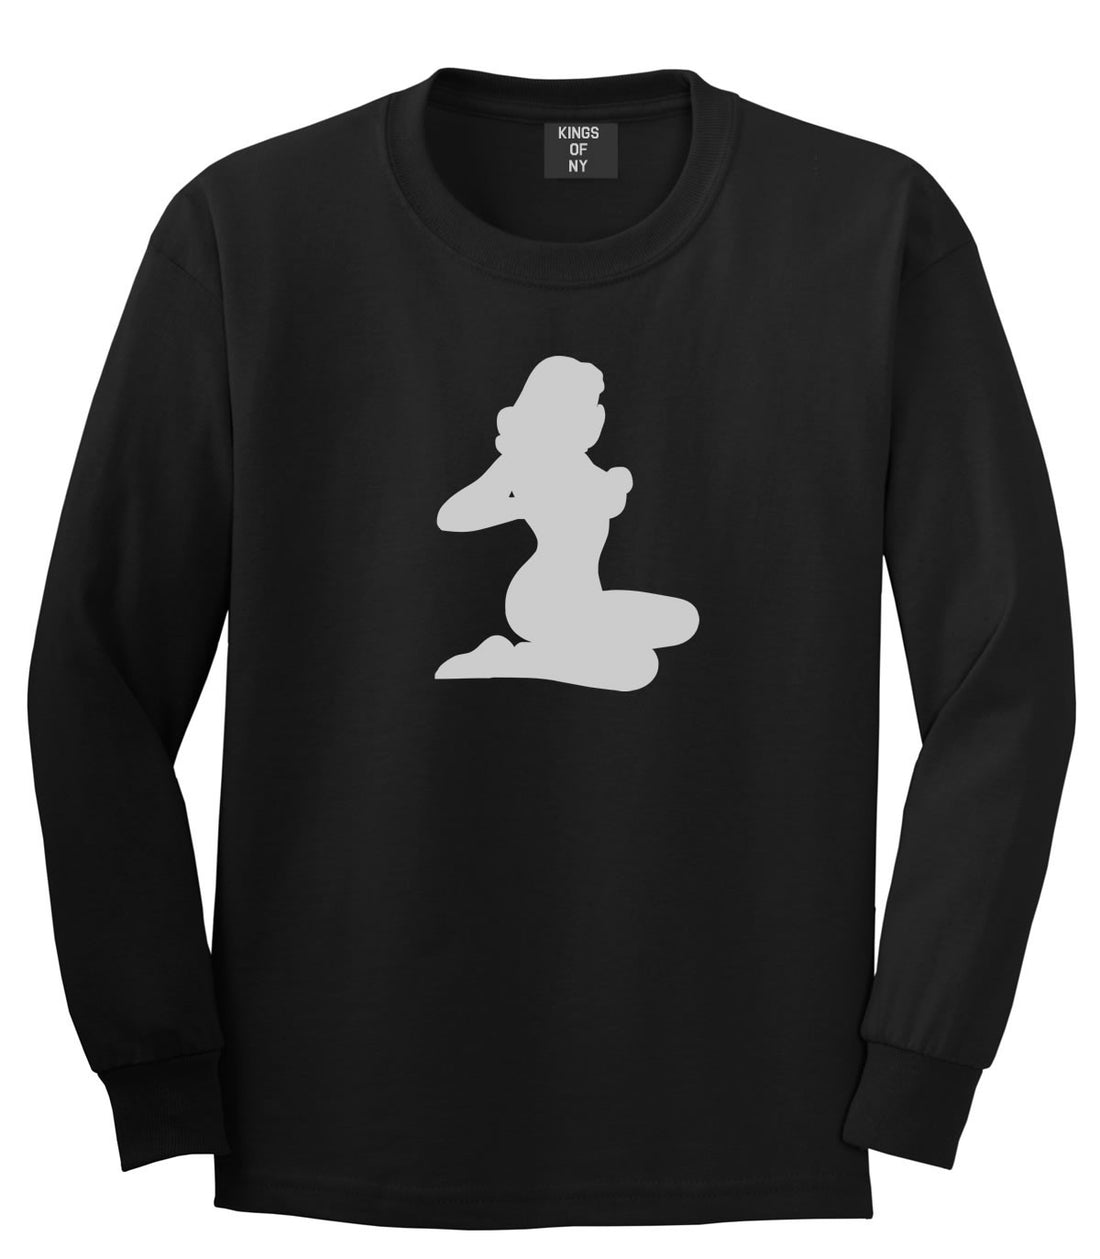 Stripper Girl Long Sleeve T-Shirt by Kings Of NY